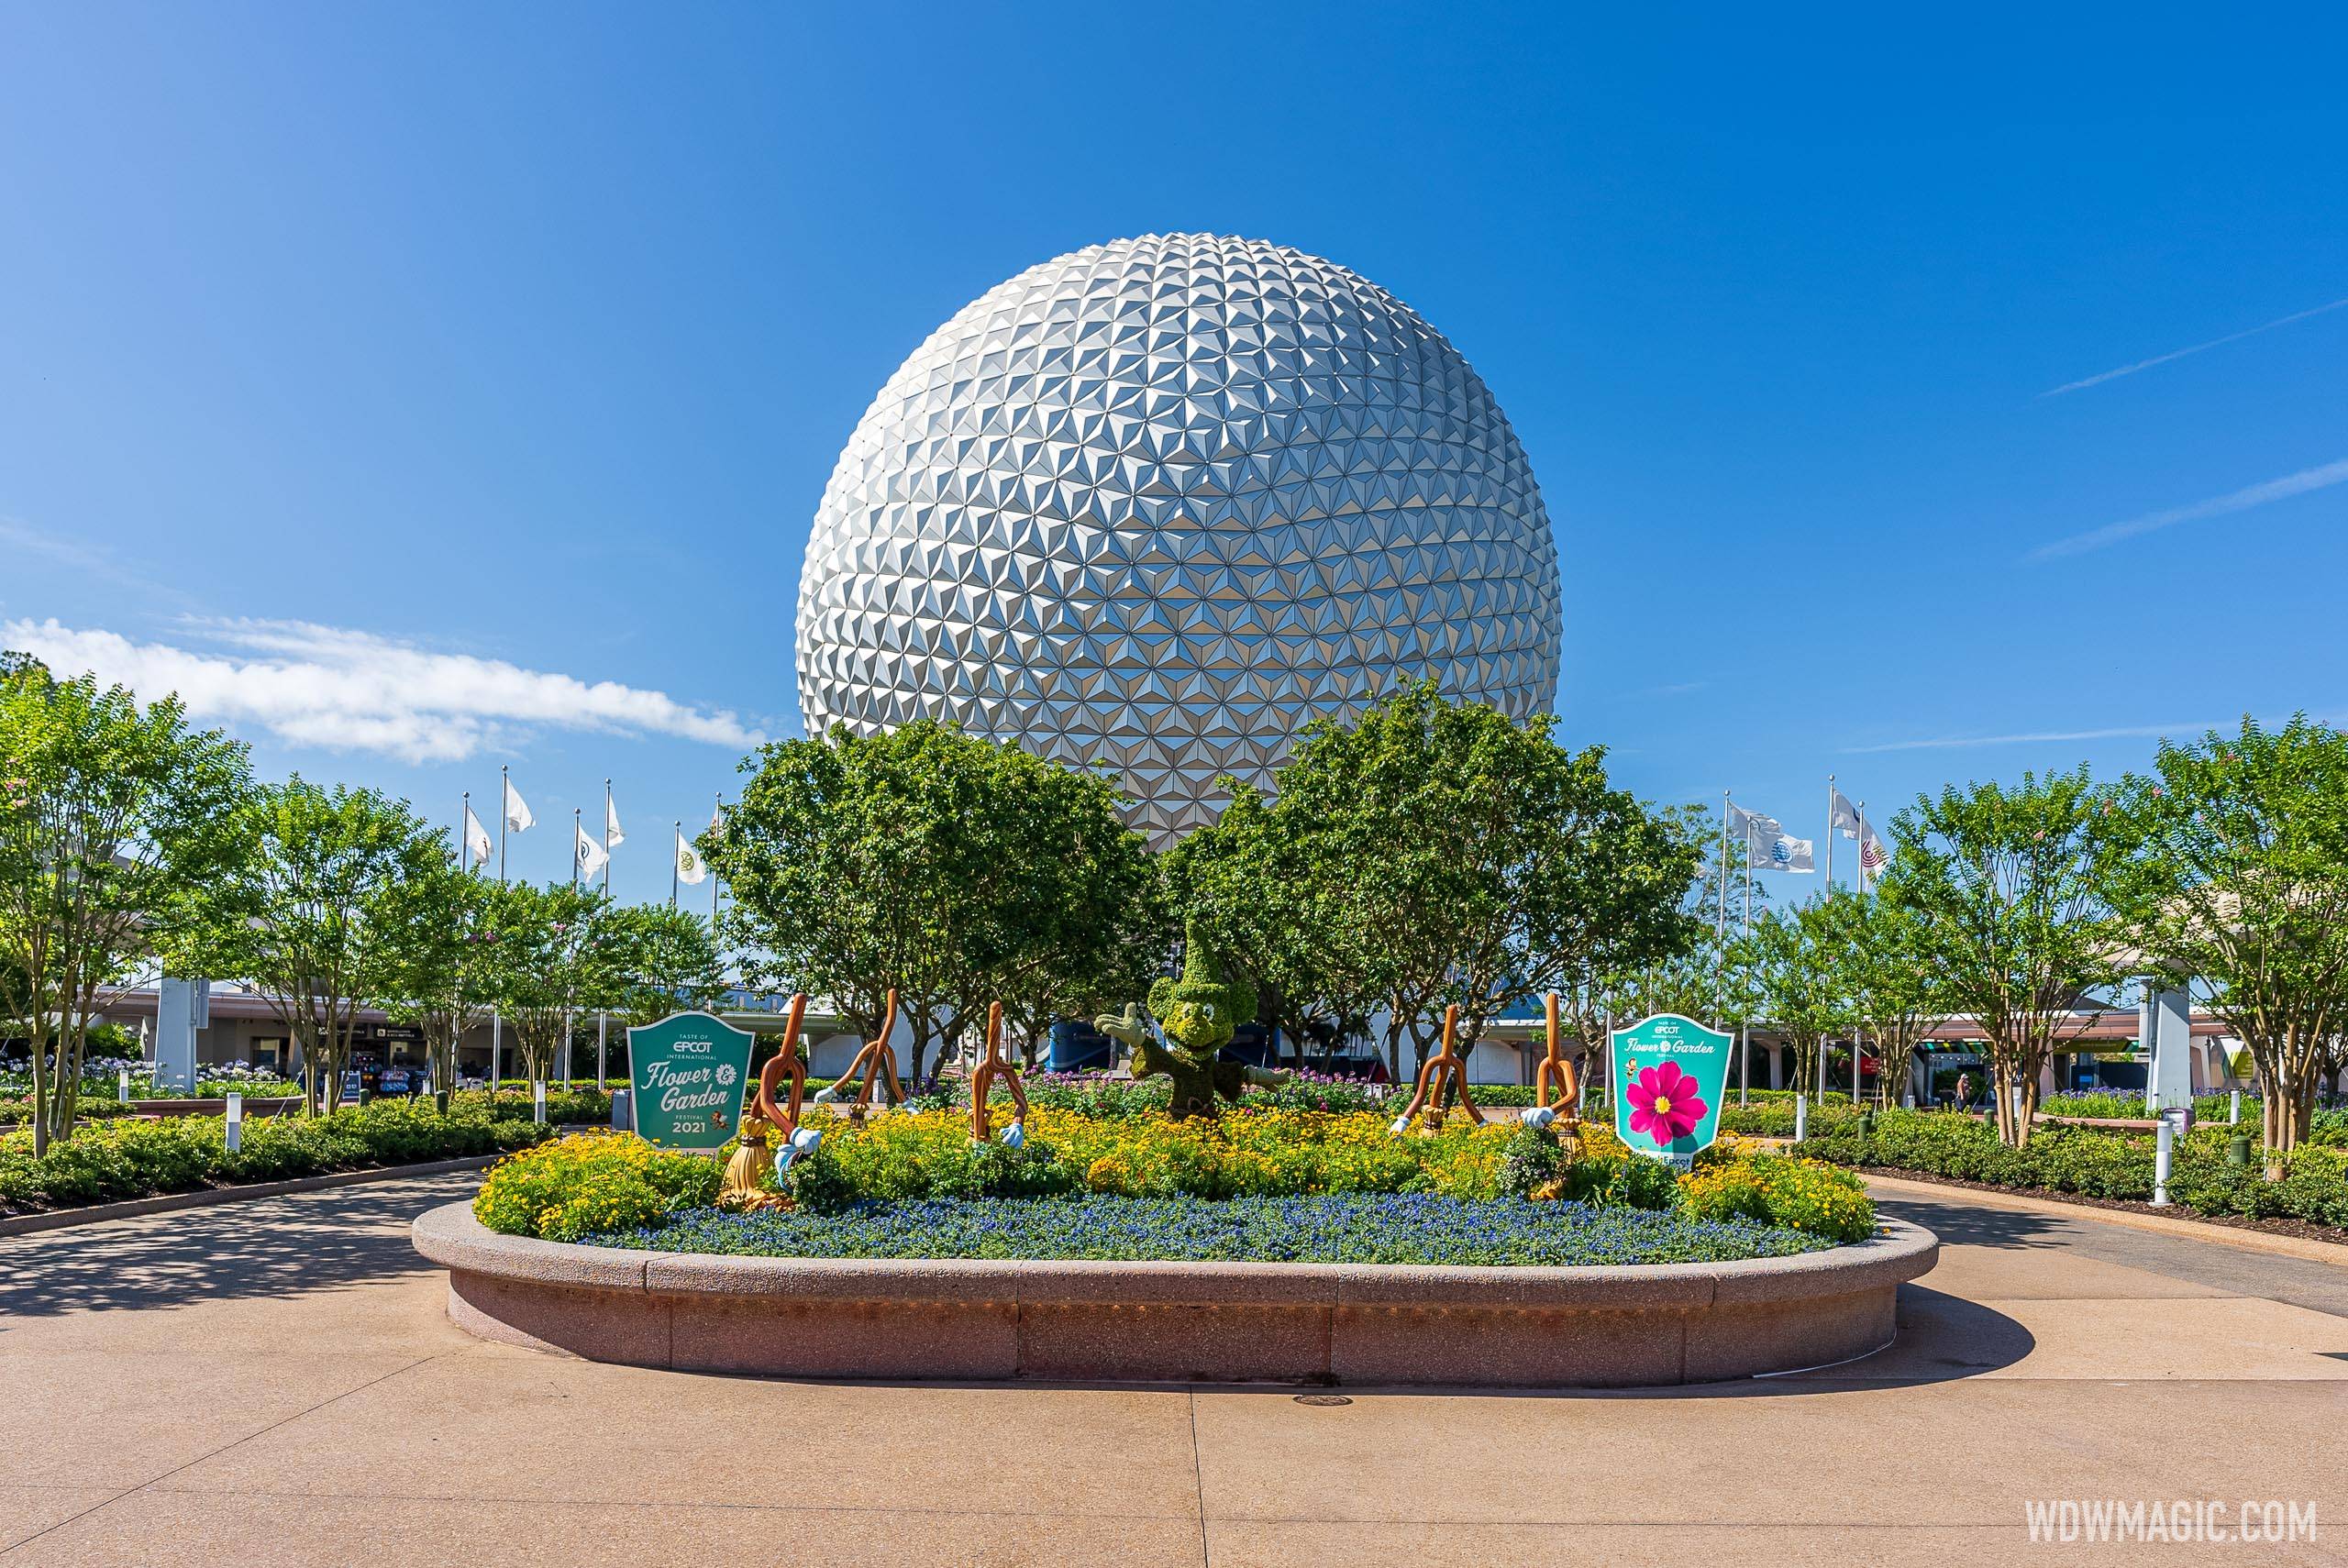 Theme Park Reservations No Longer Needed for Date-Based Tickets Starting  Jan. 9, 2024 - Orlando Theme Park News